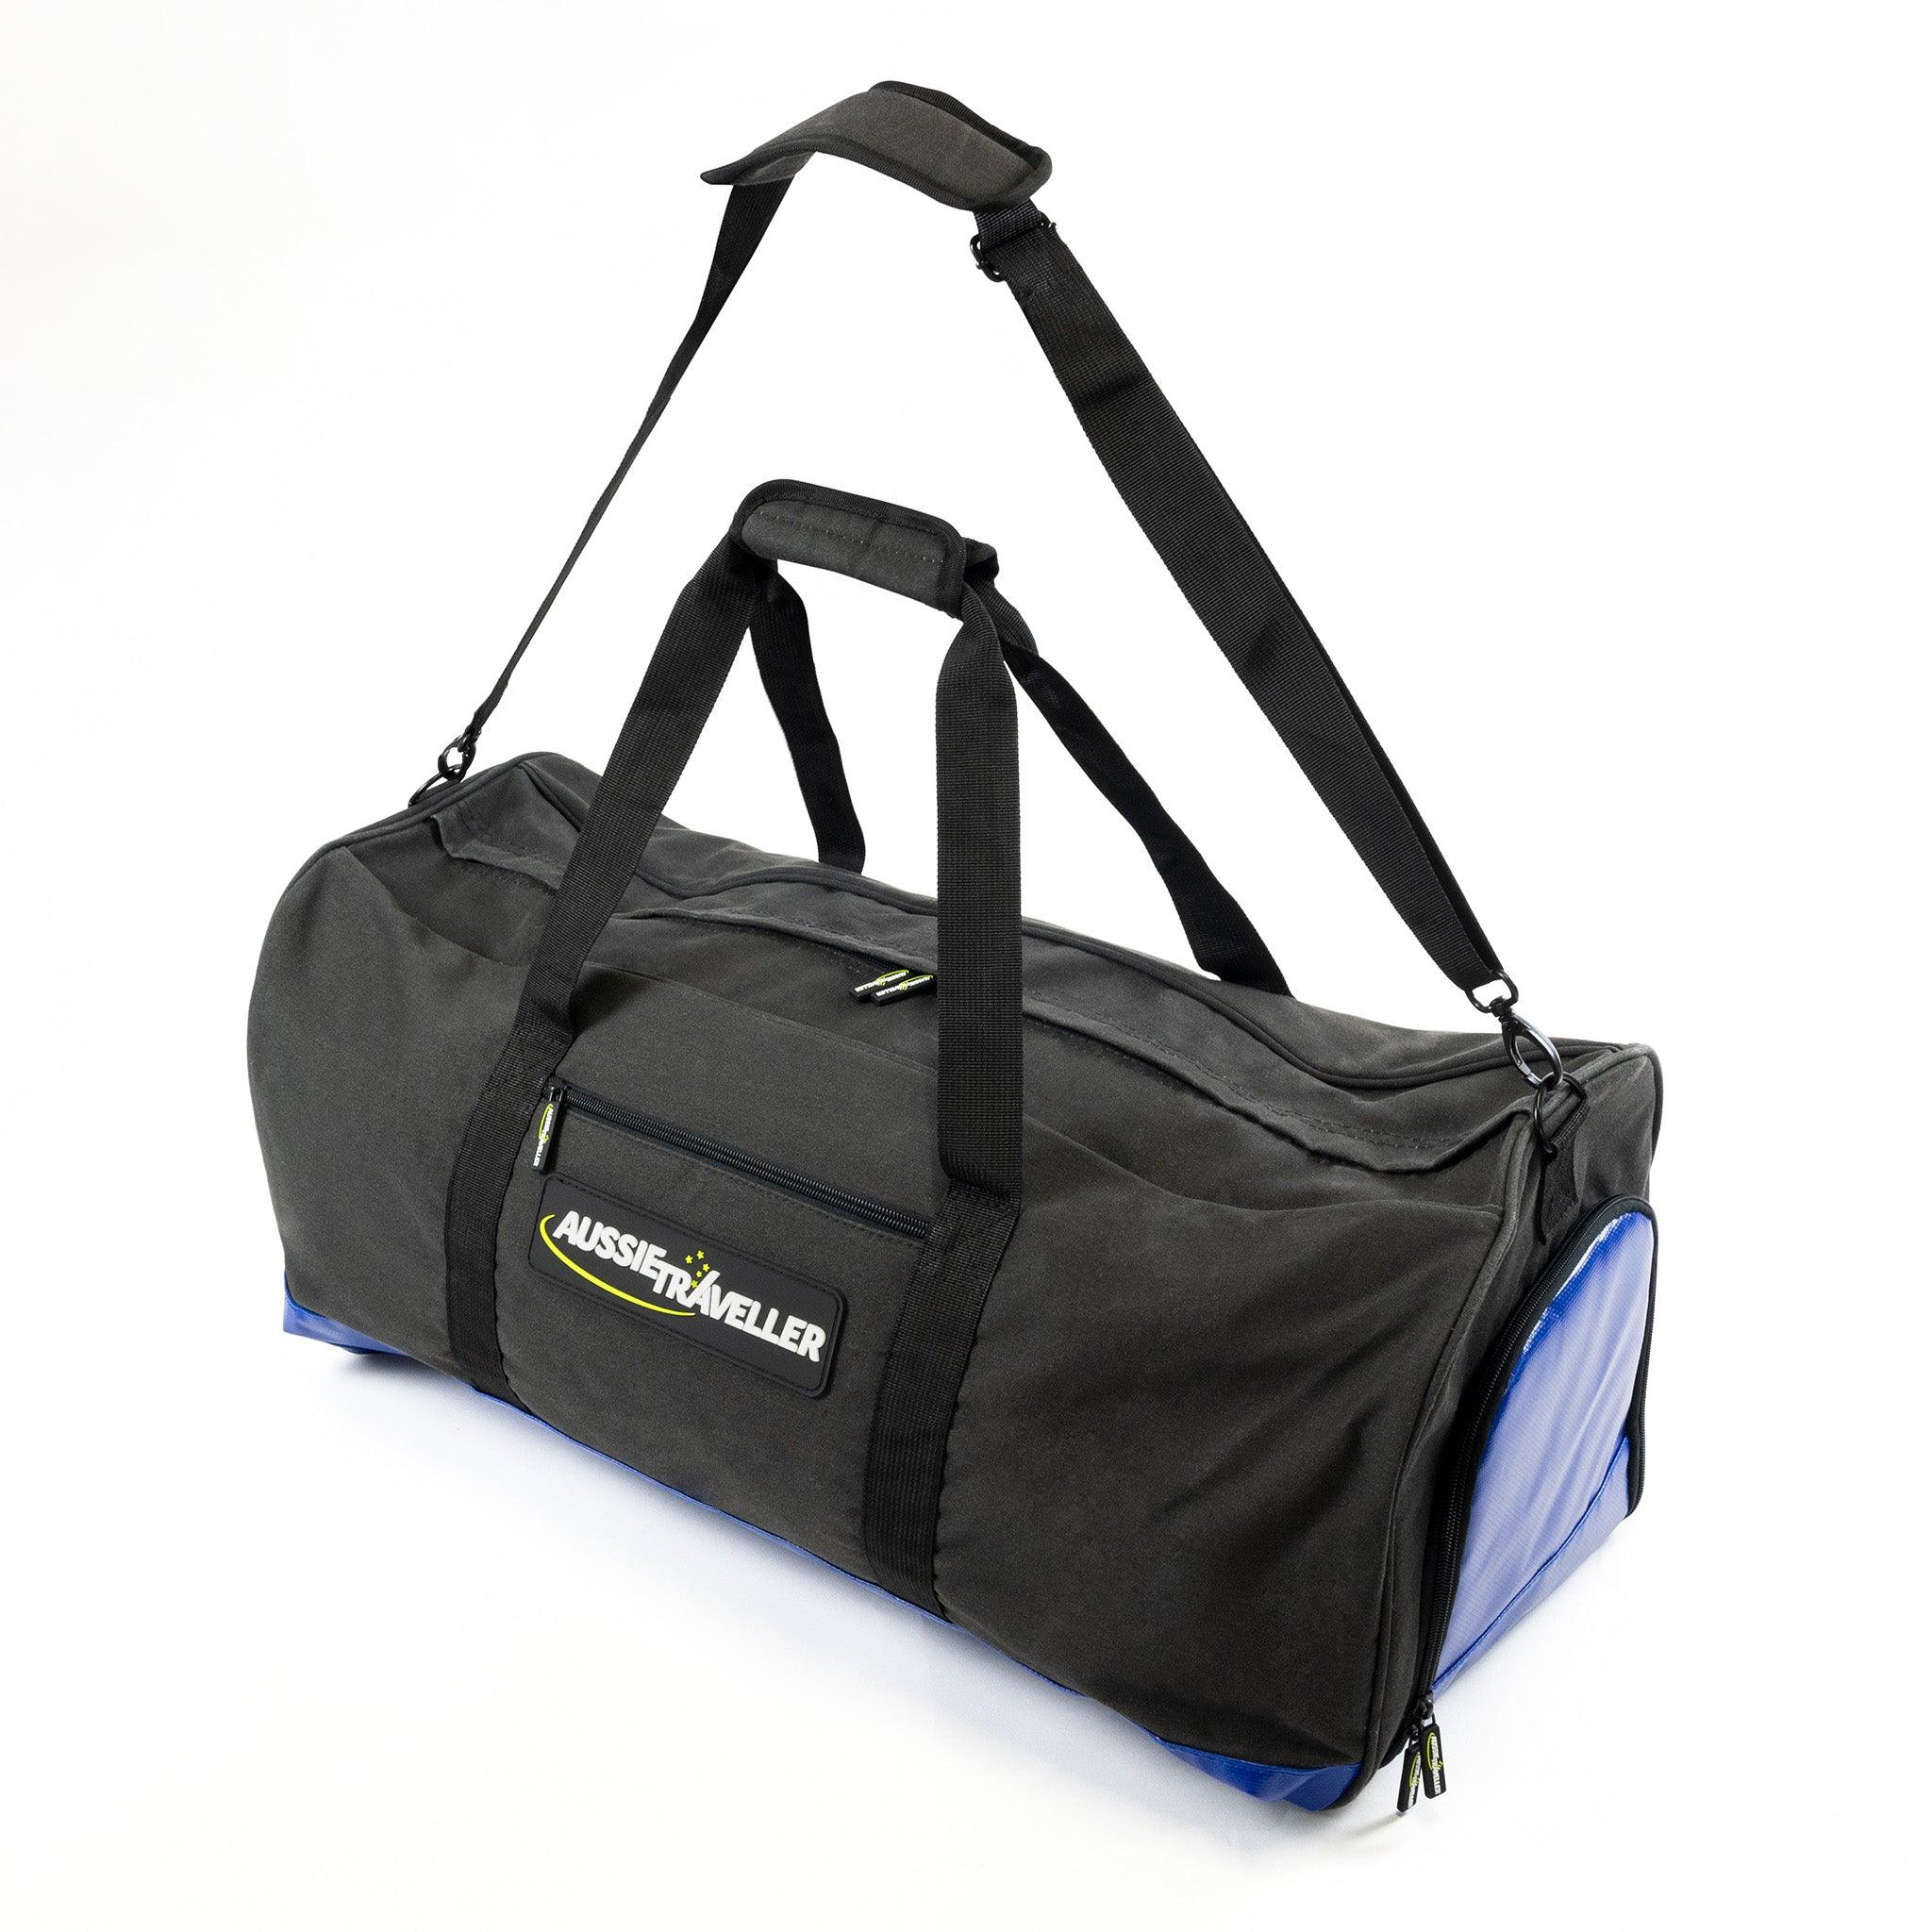 Wheel Duffle Bags - Buy duffle bag with trolley Online at American Tourister